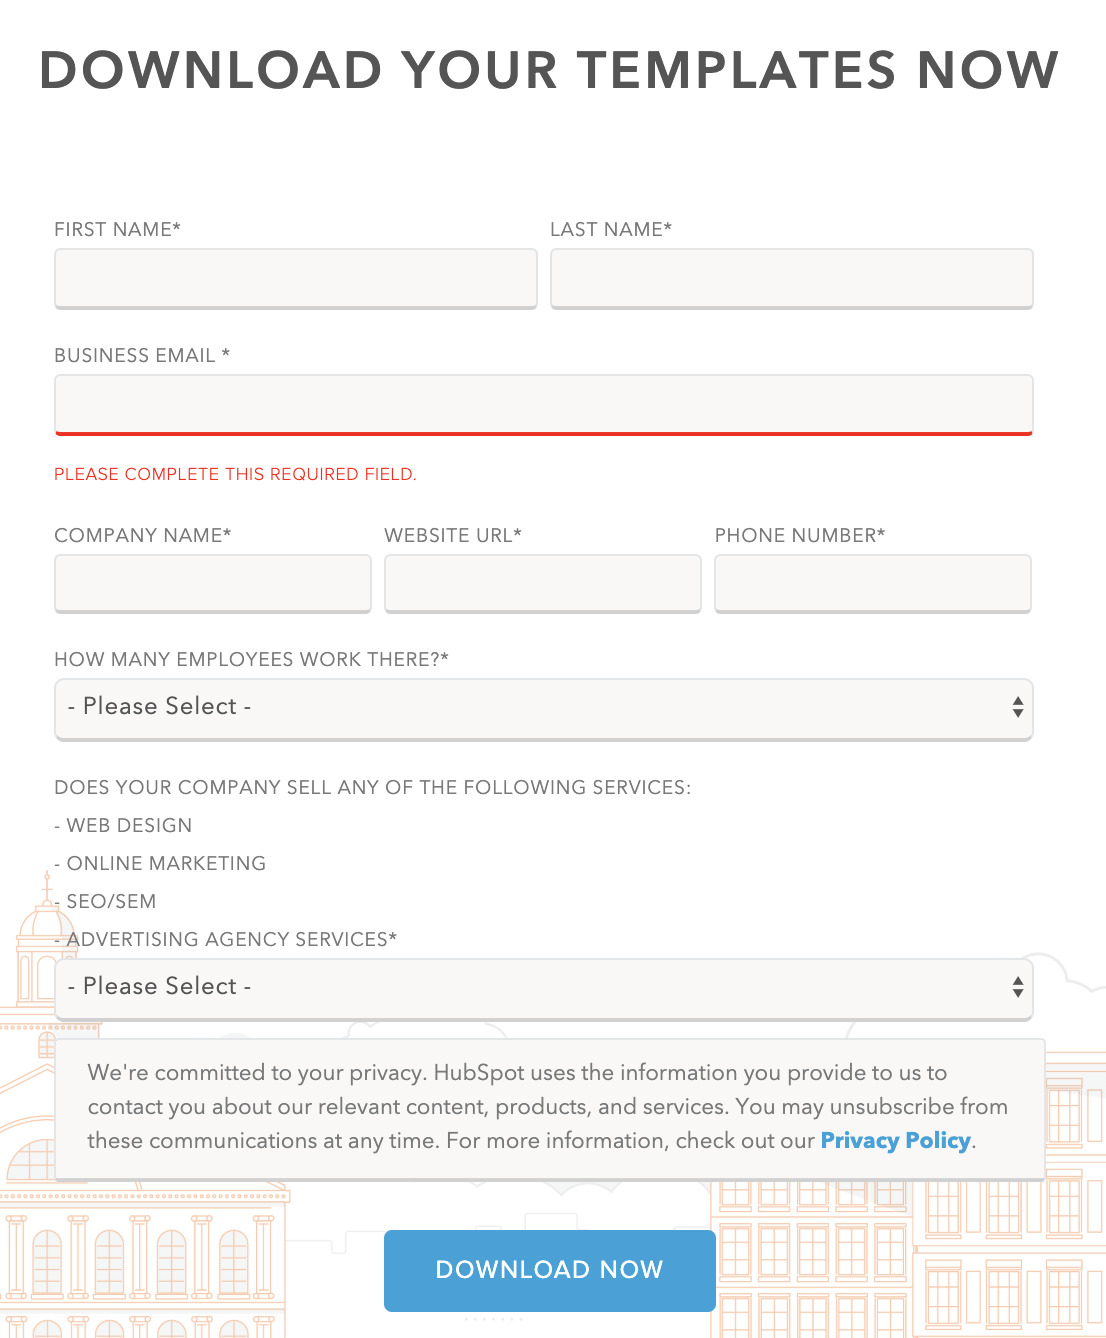 HubSpot email sign-up form in order to download a selection of blog post templates